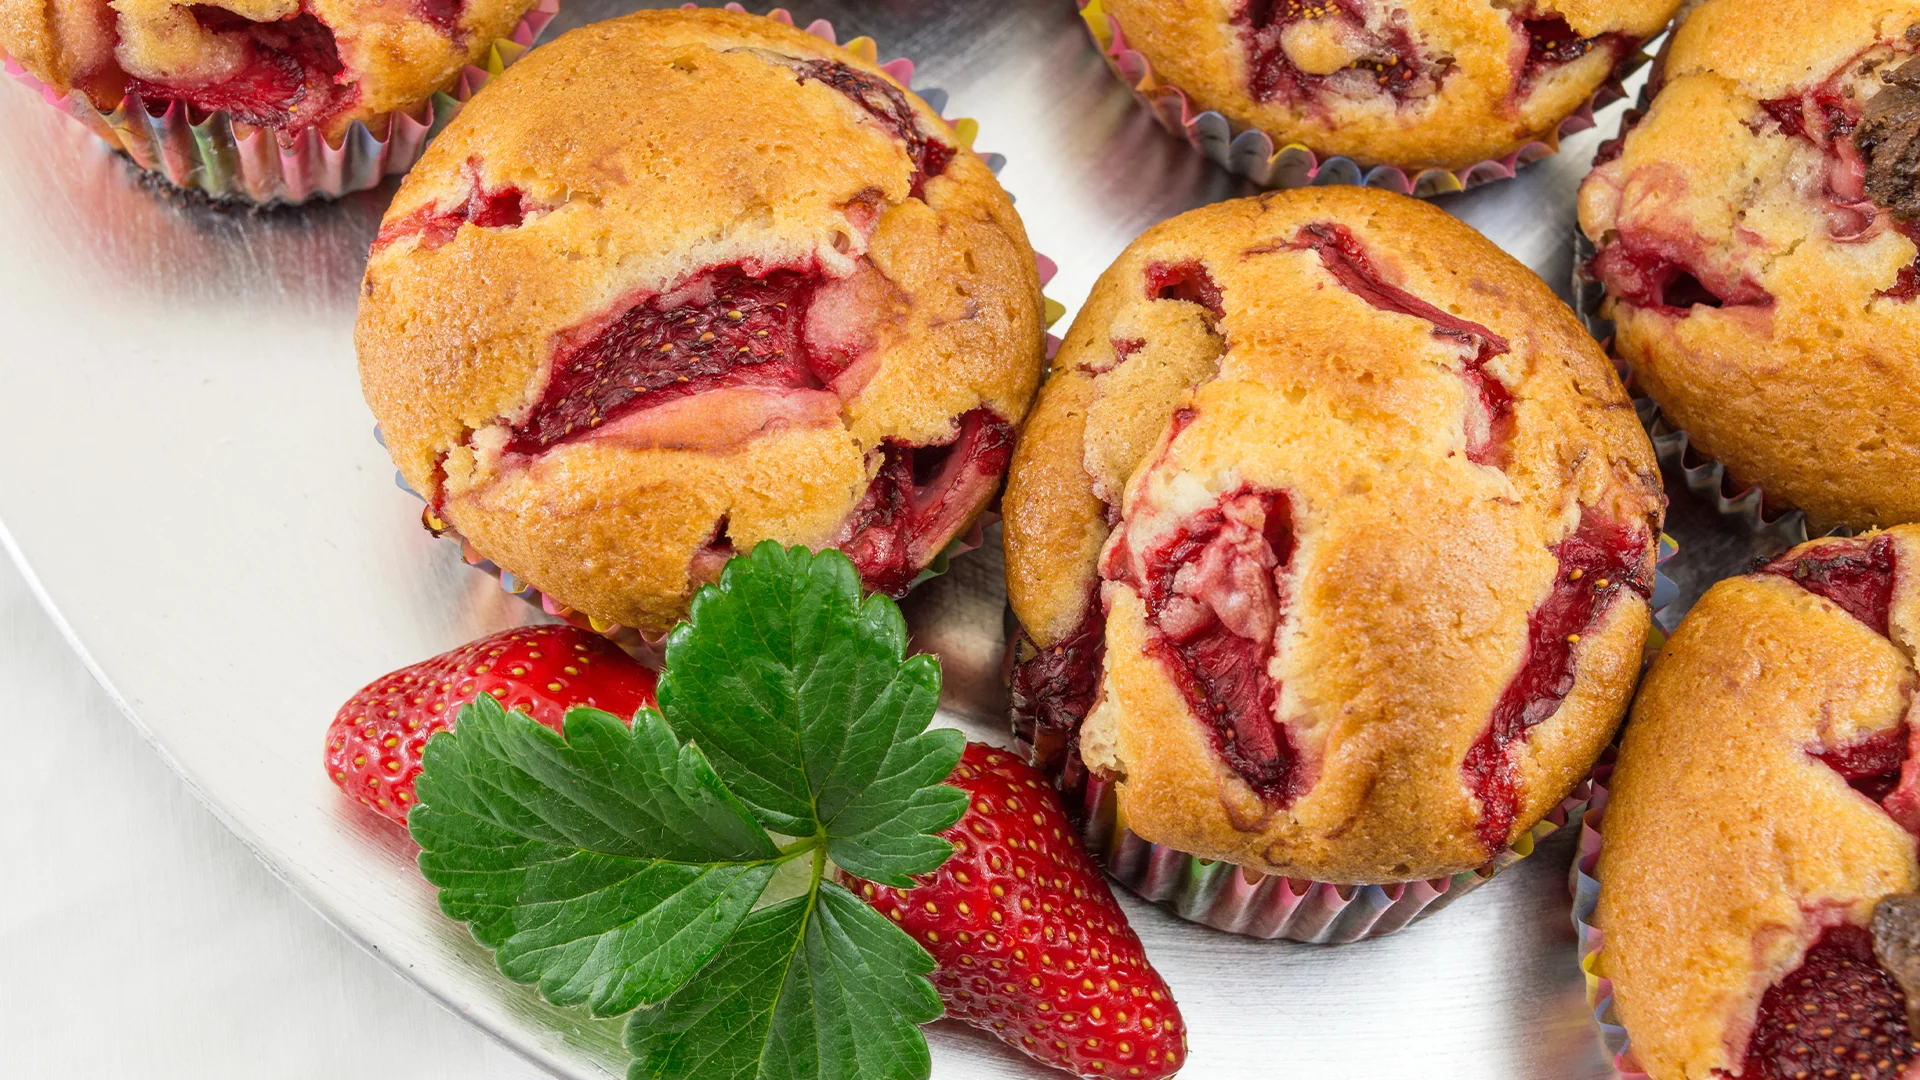 Strawberry muffins on a white plate.